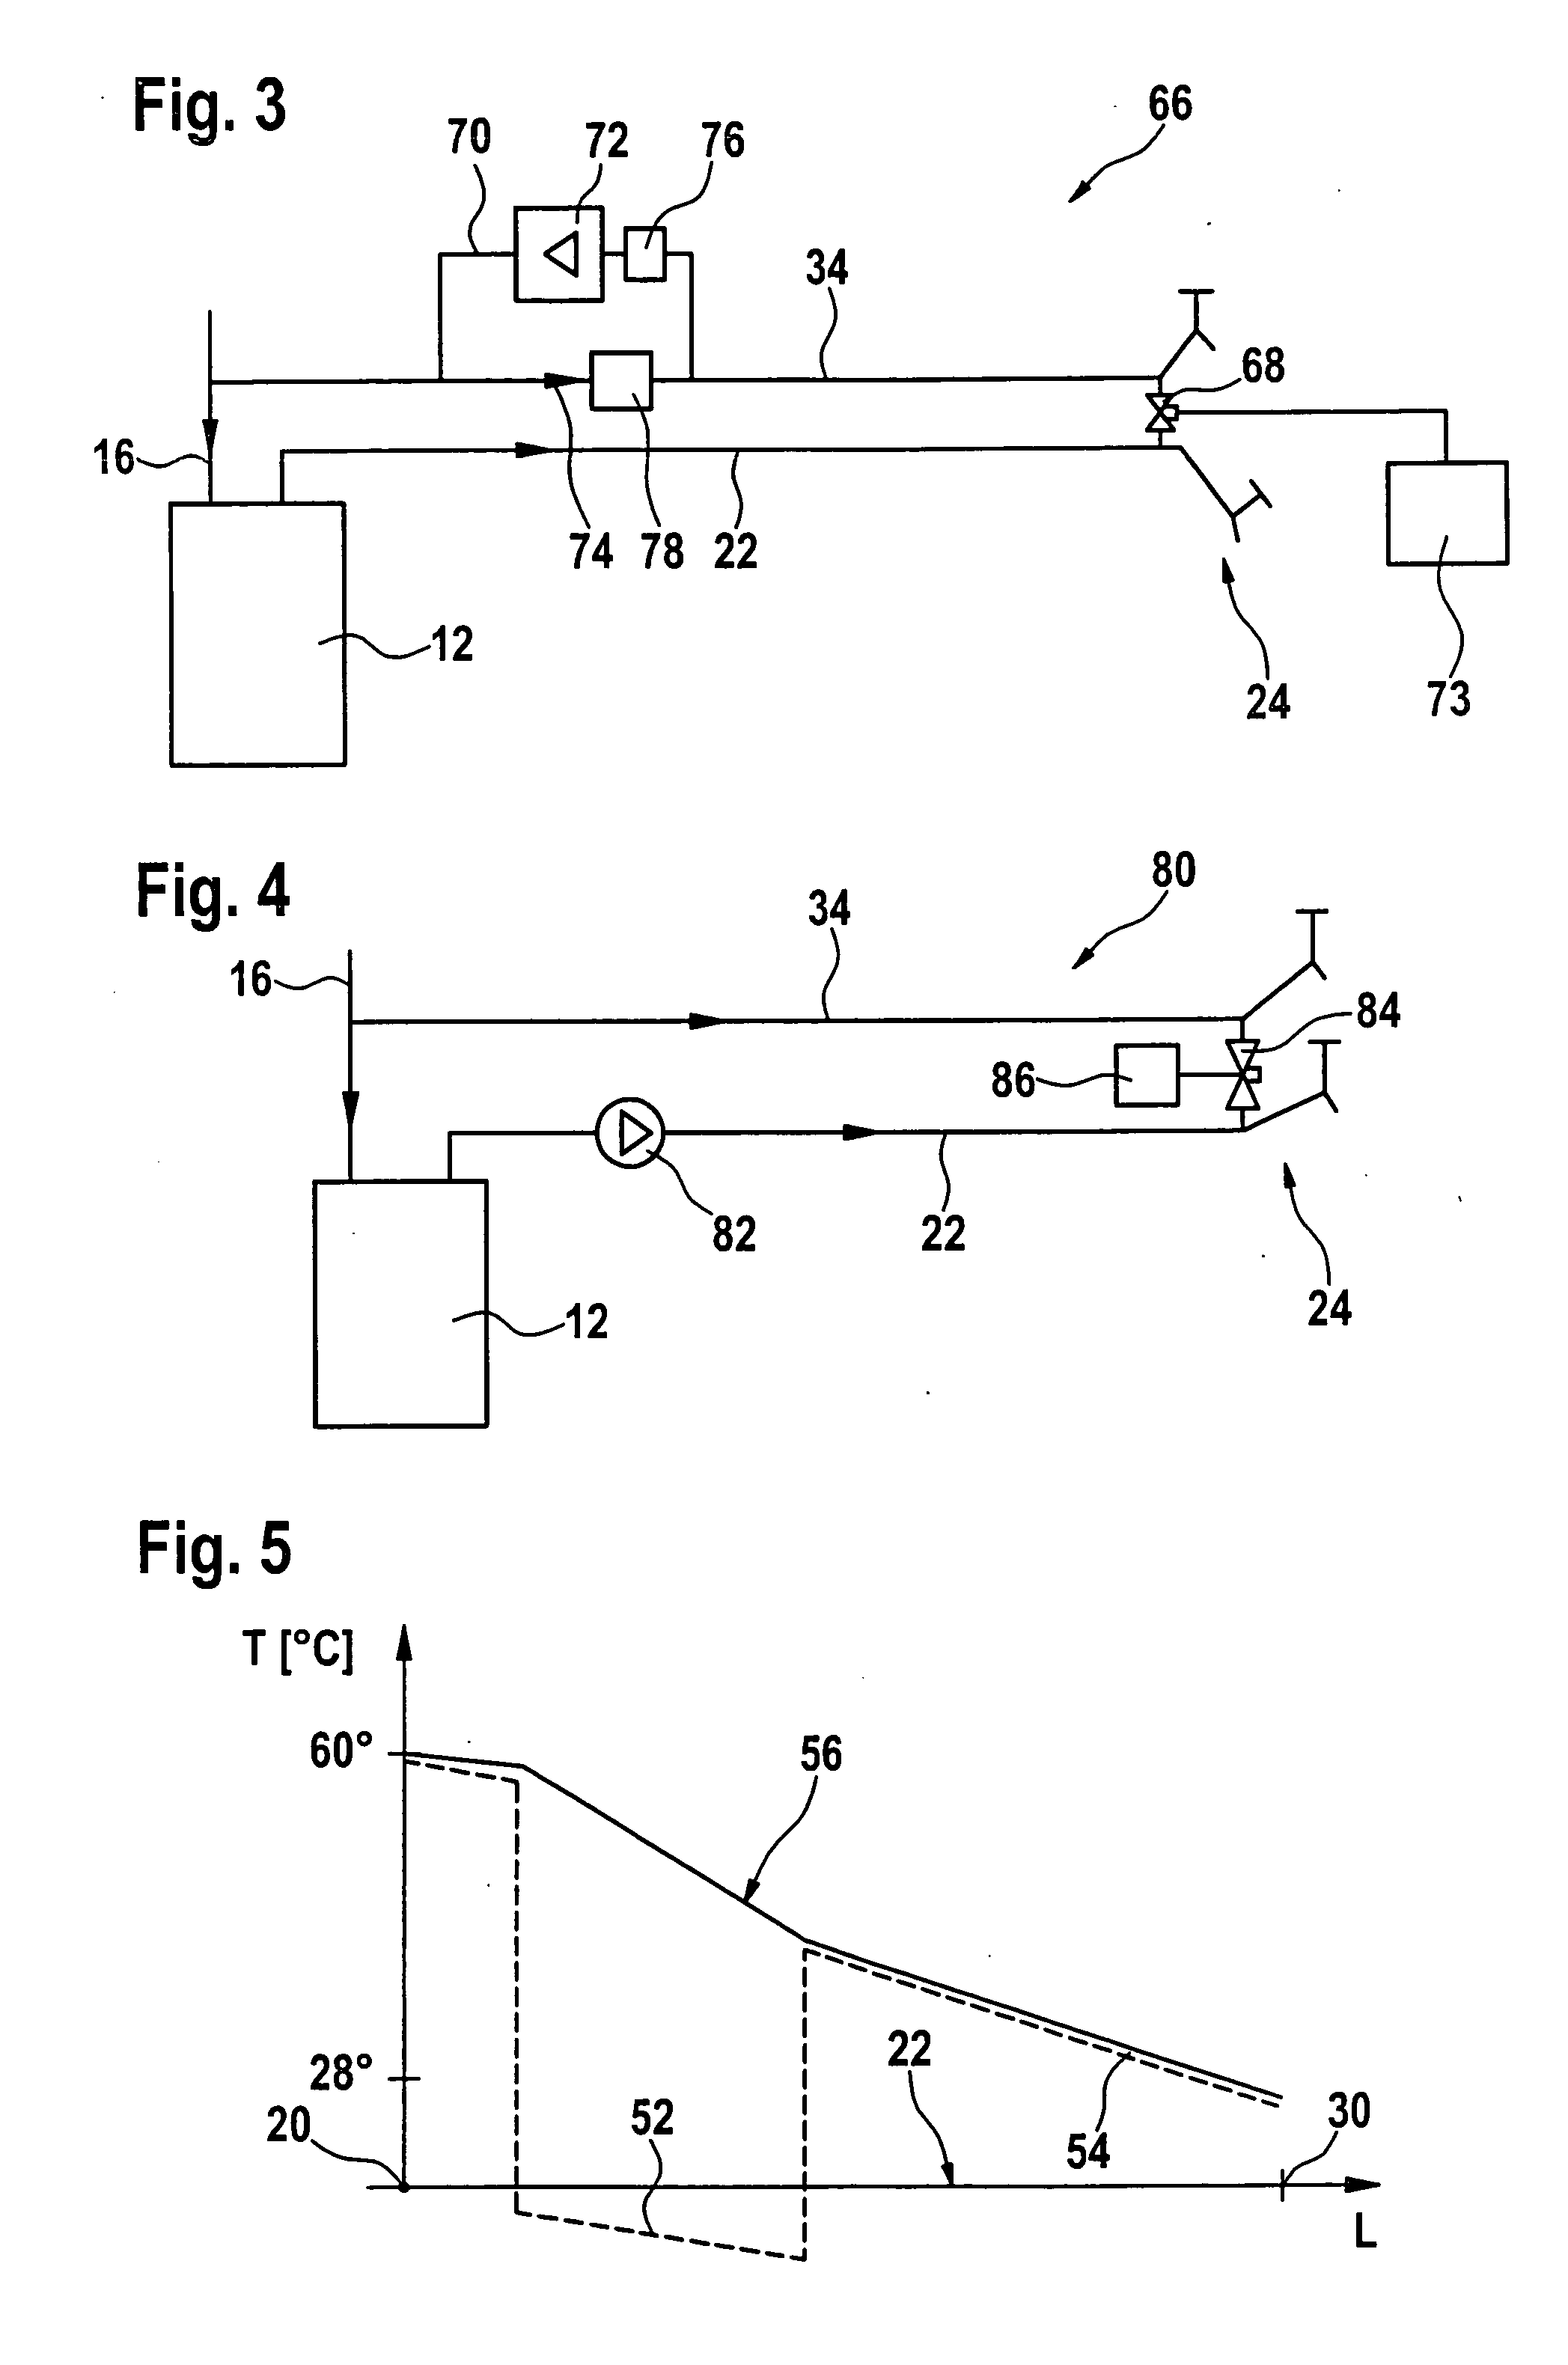 System and method for making hot water available in a domestic water installation and domestic water installation